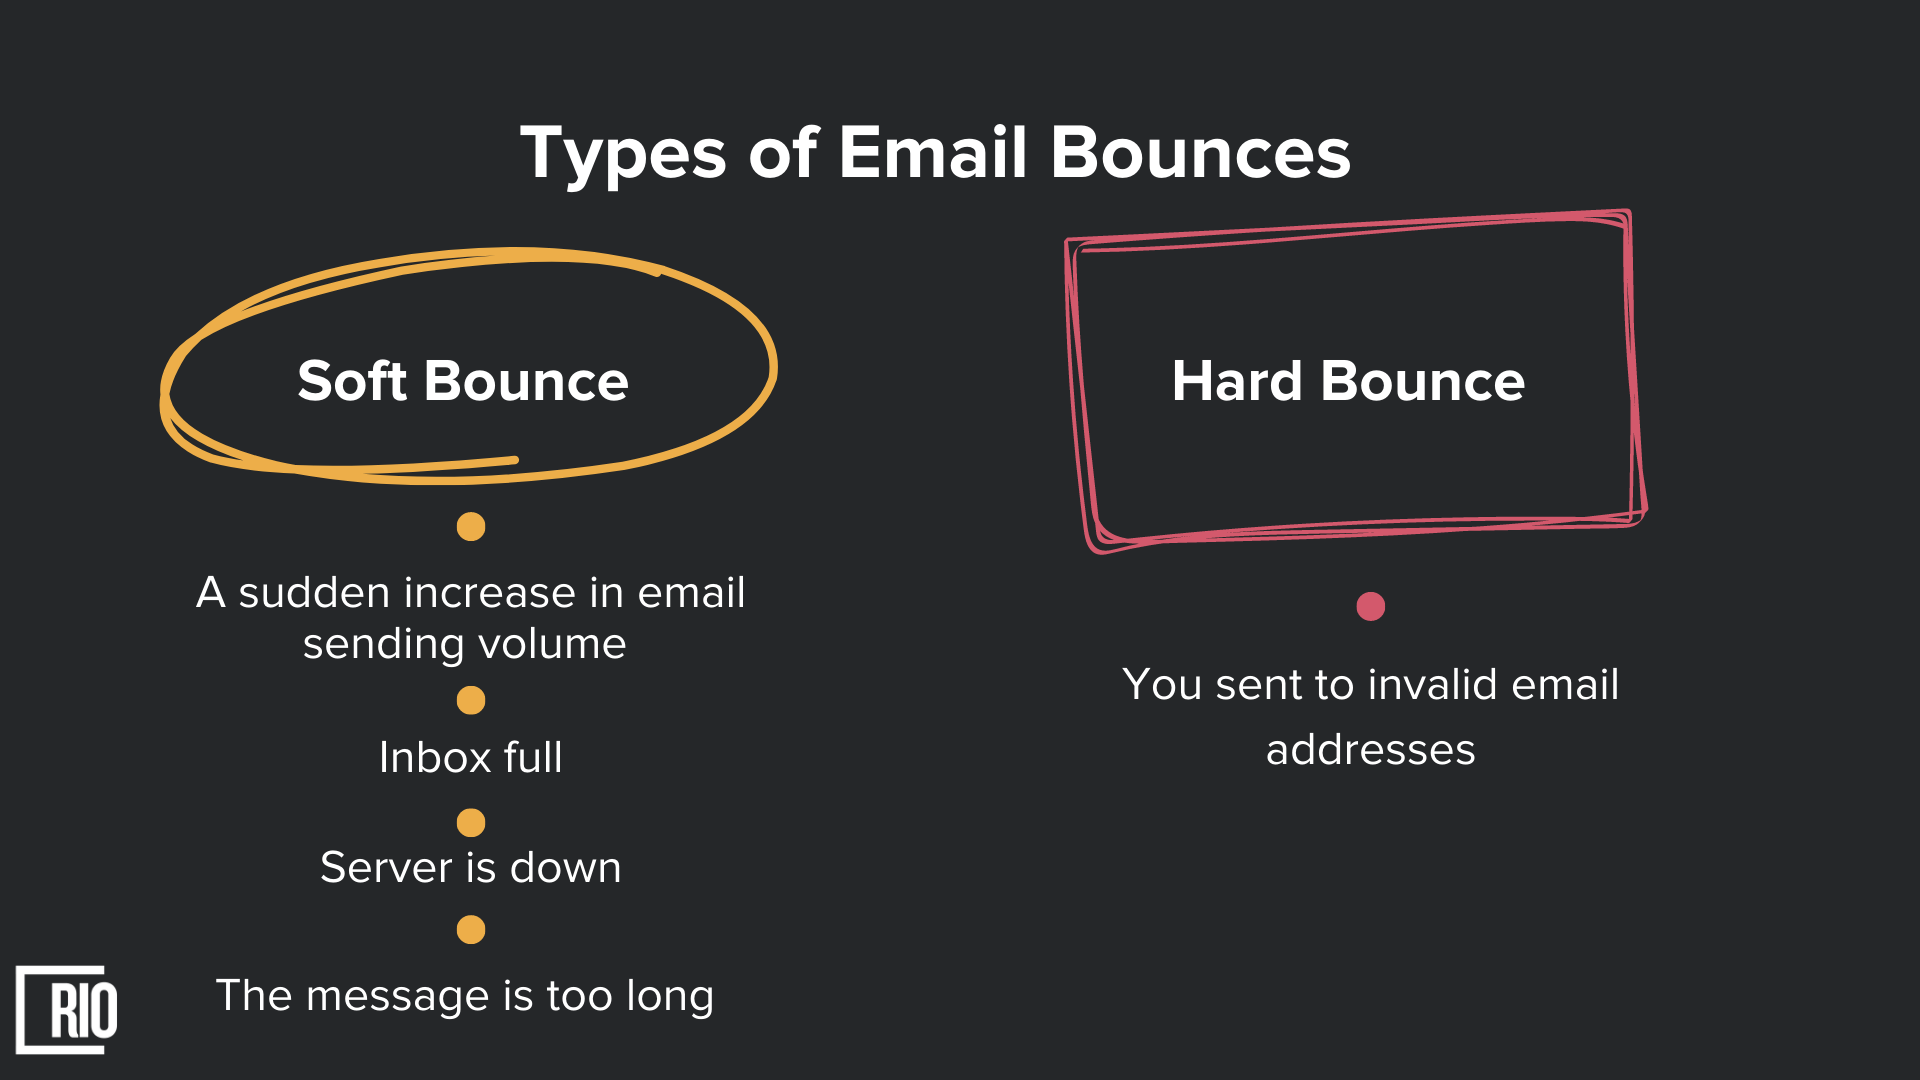 Types of Email Bounces